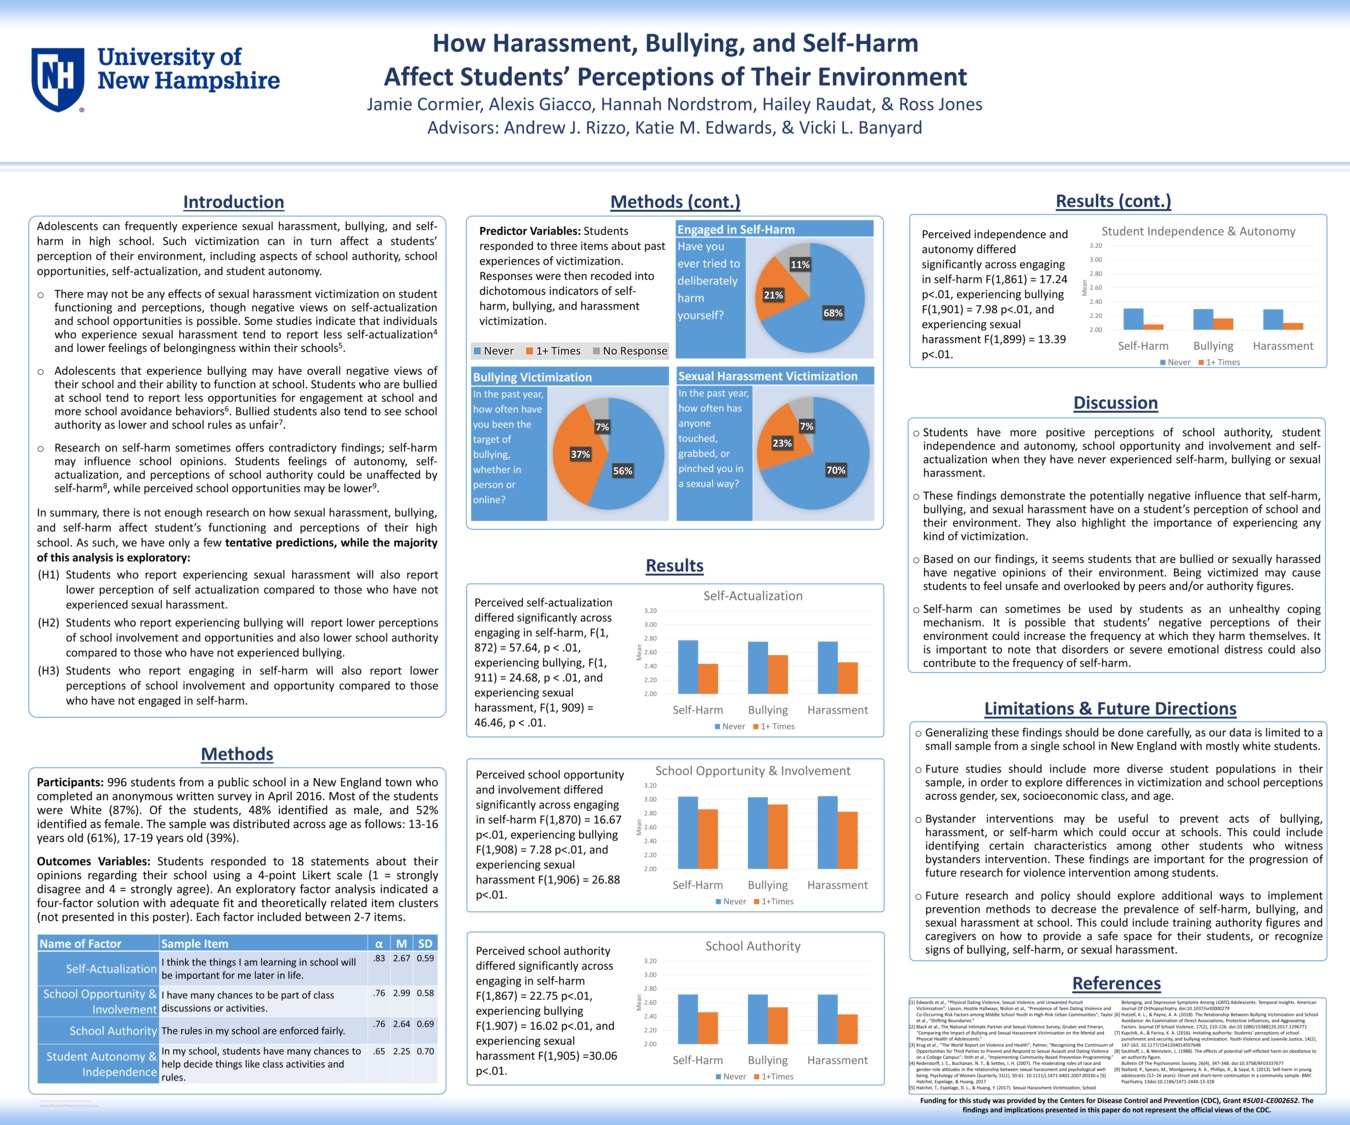 How Harassment, Bullying, And Self-Harm Affect Students’ Perceptions Of Their Environment by ajr1039